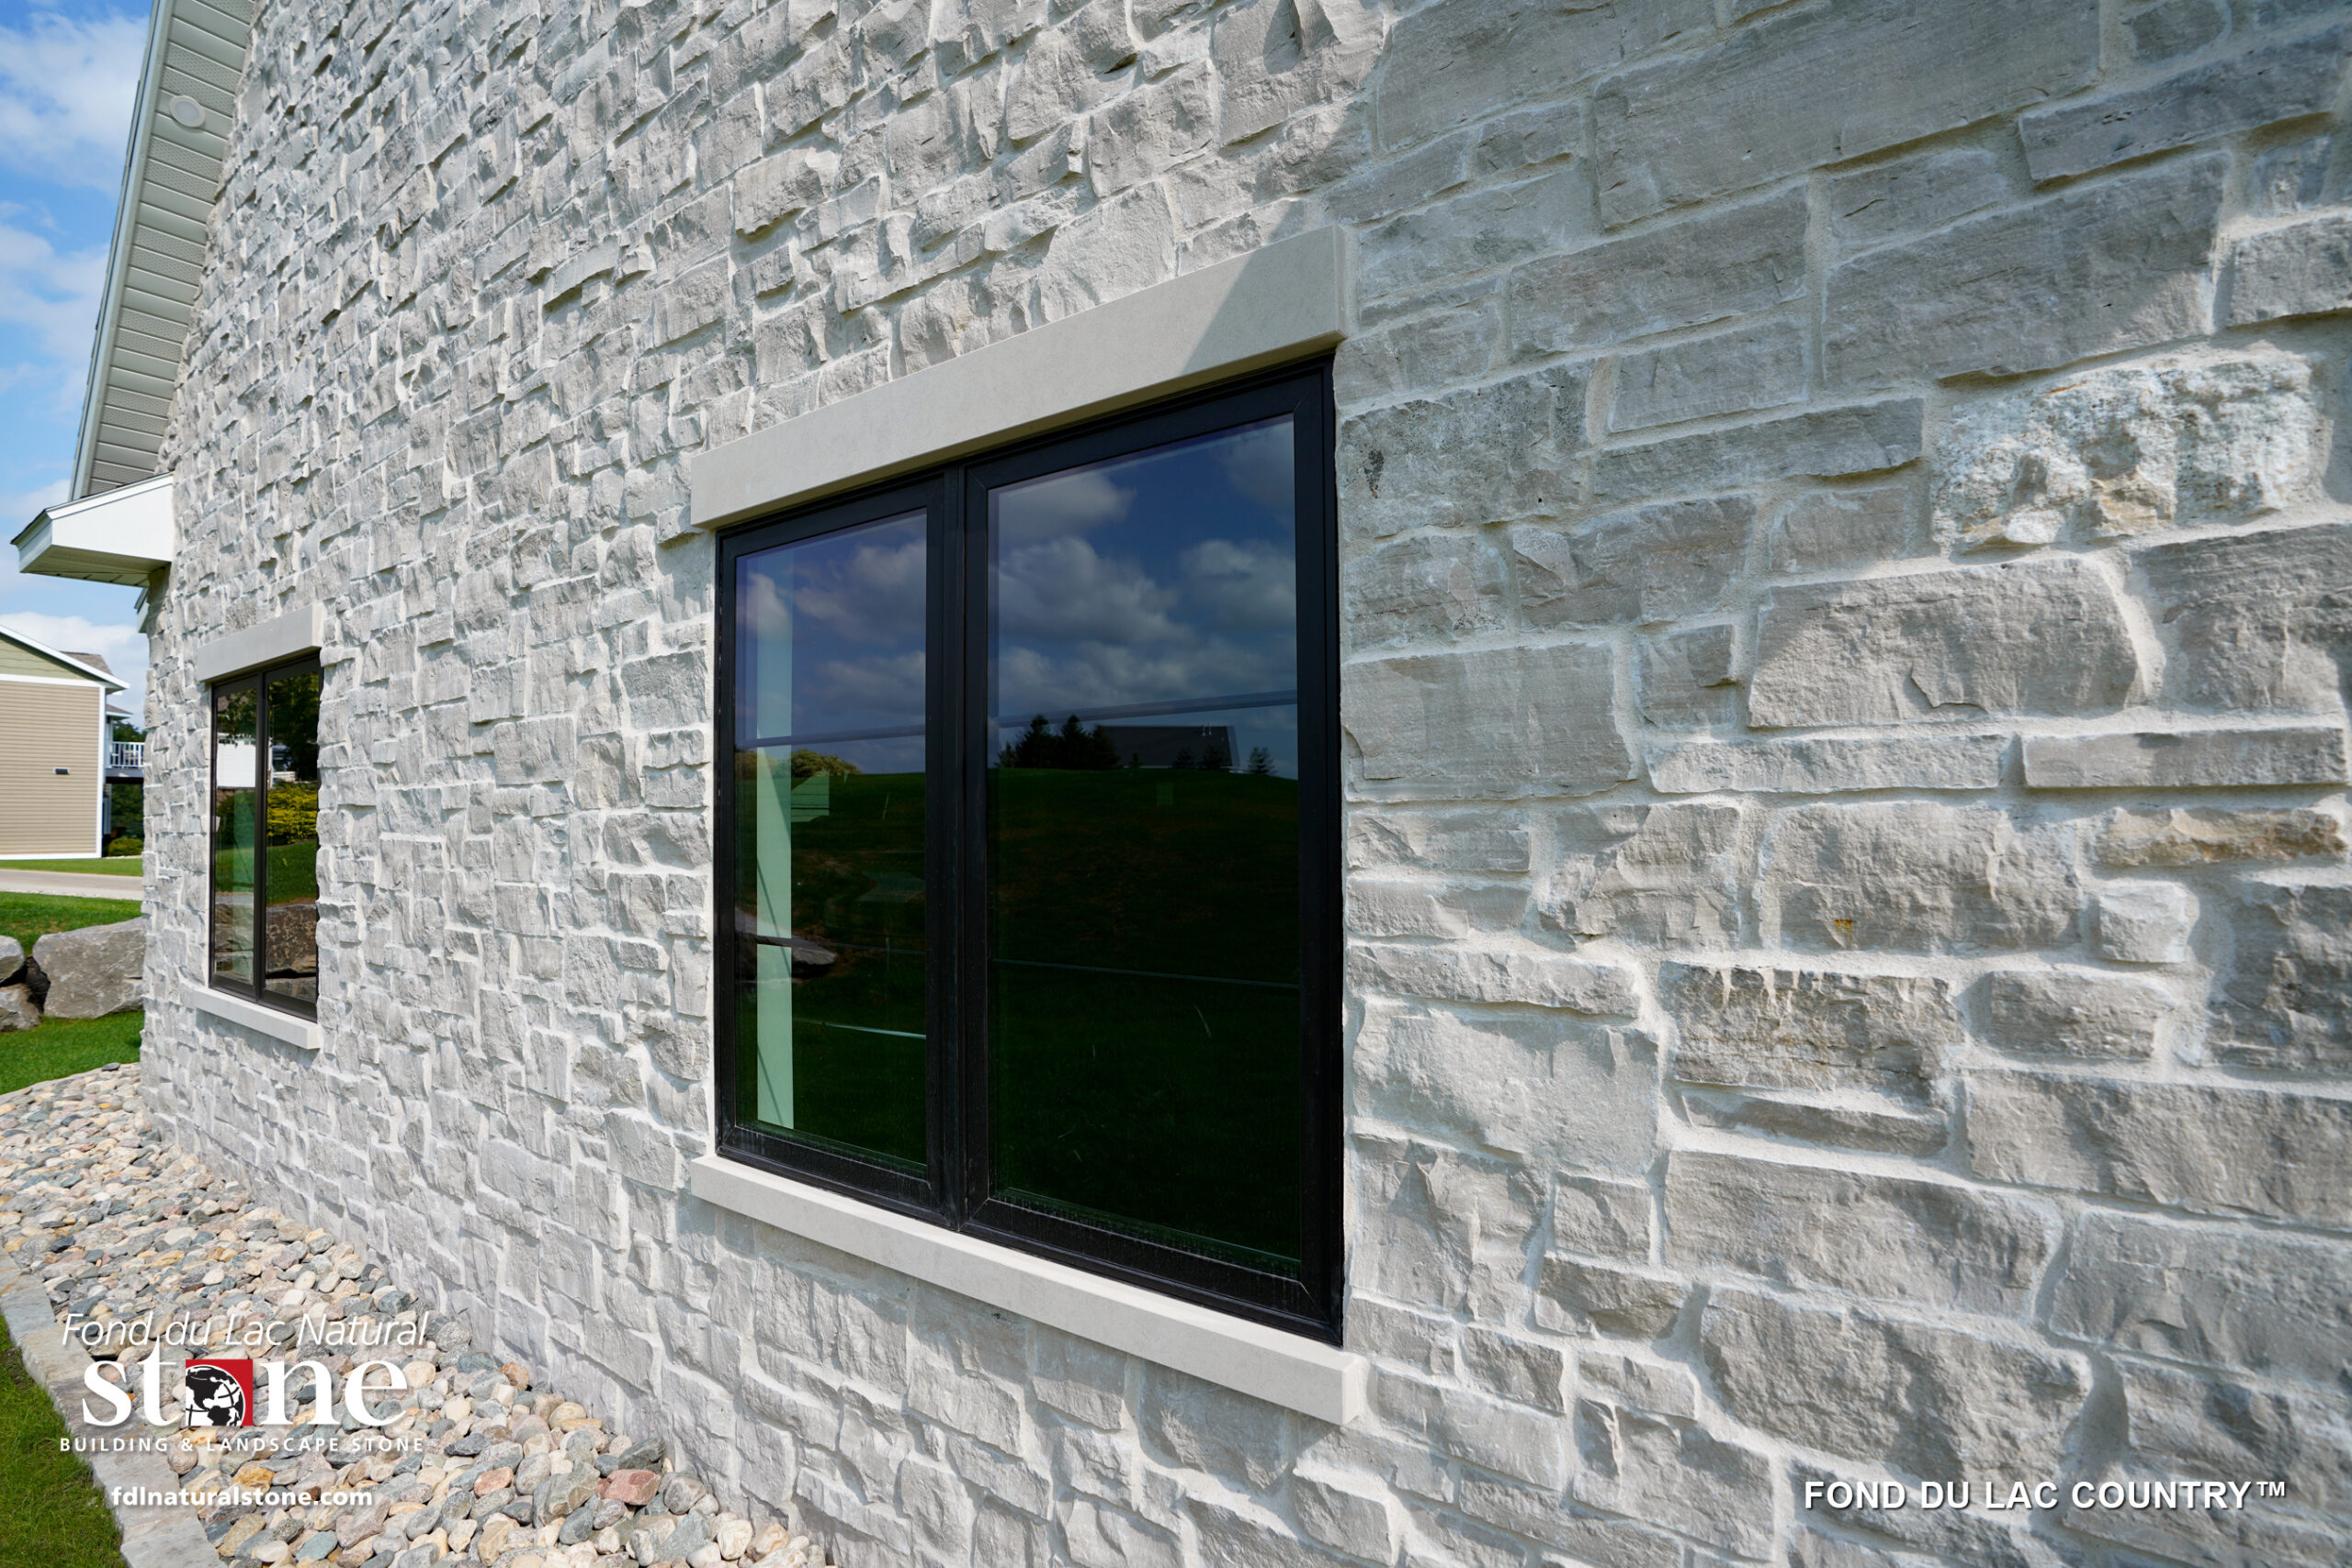 Fond du Lac Country™ - Residential Exterior - Fond du Lac Natural Stone